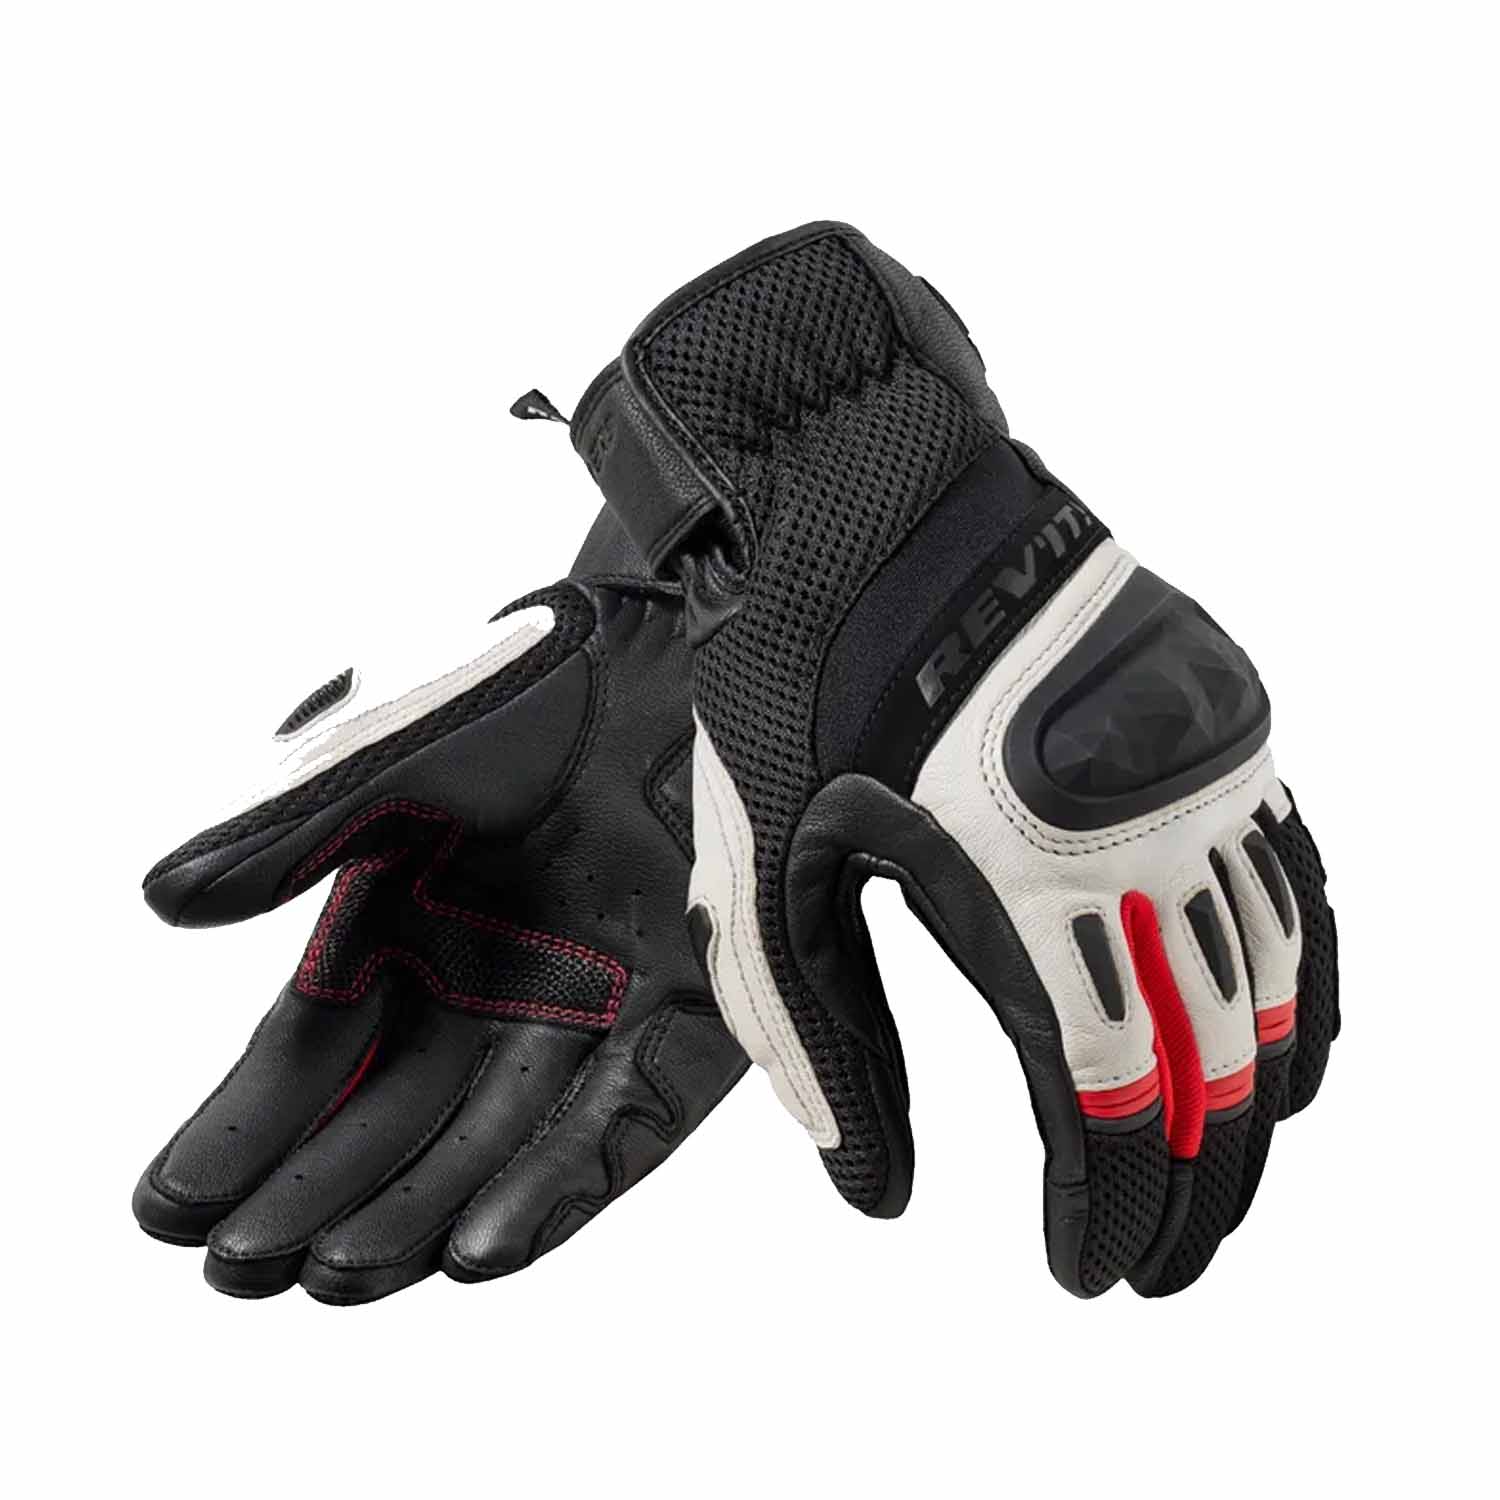 Image of EU REV'IT! Dirt 4 Gloves Black Red Taille S